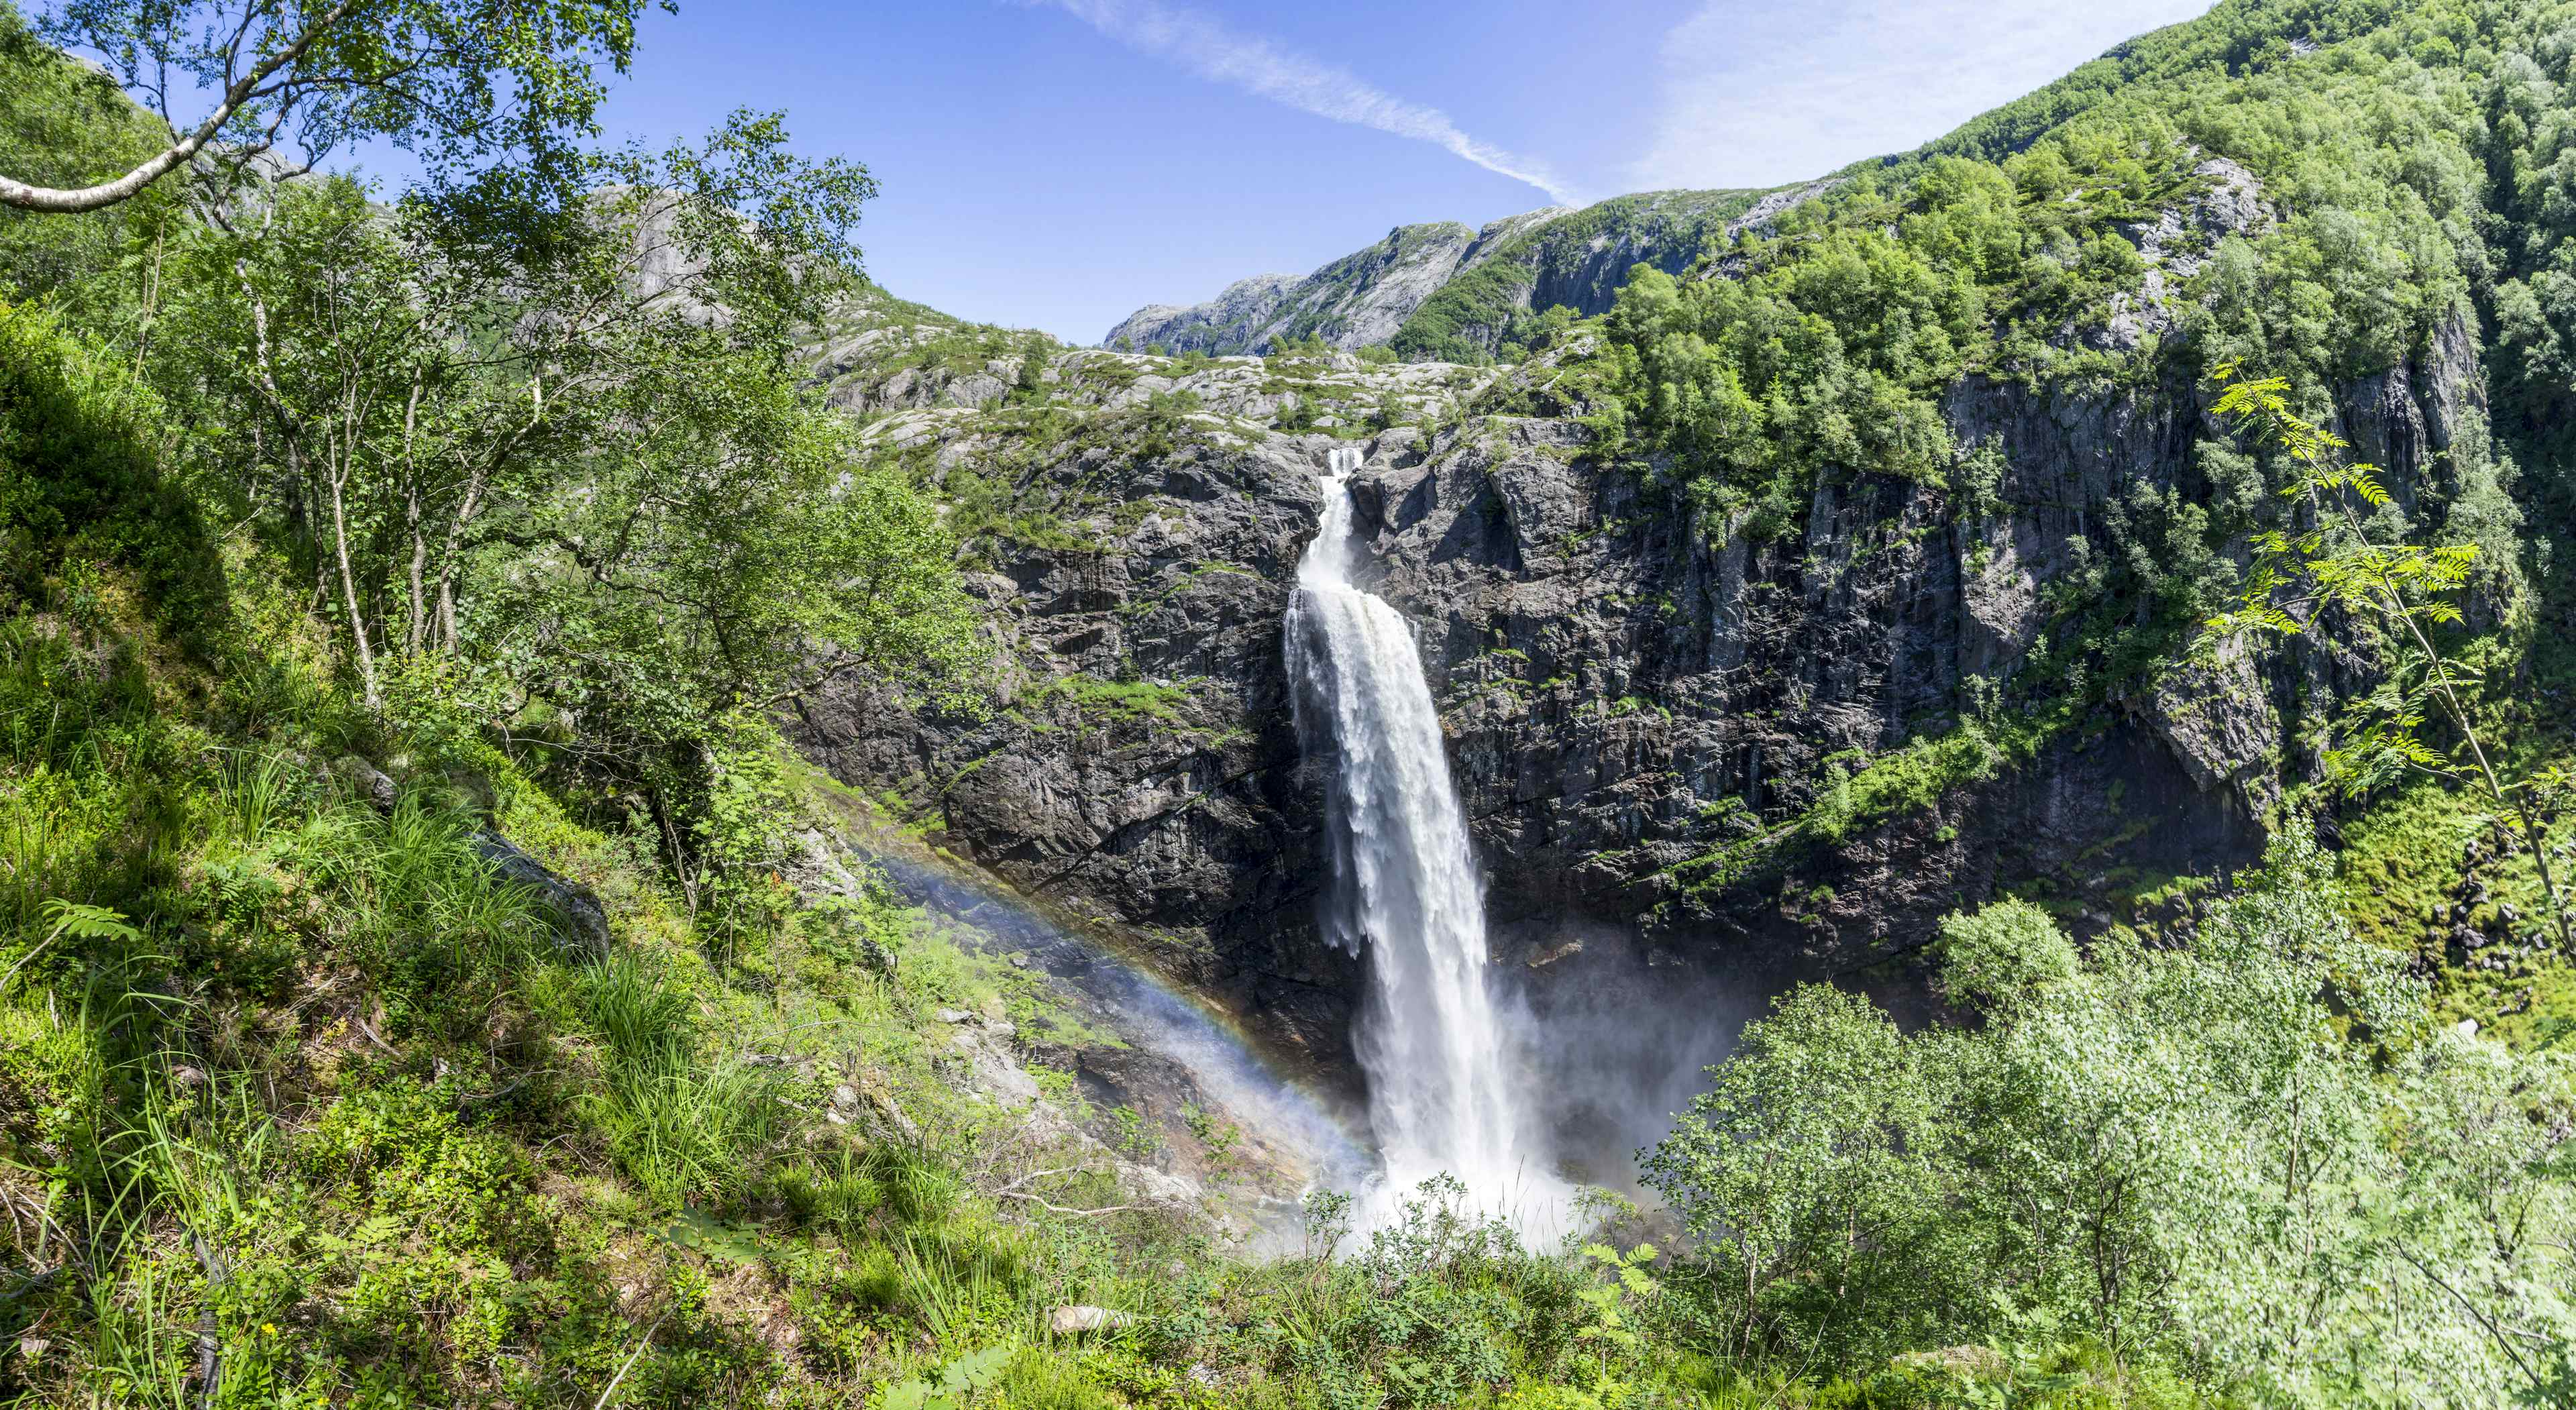 Månafossen Waterfall, viewed from viewpoint from the forest